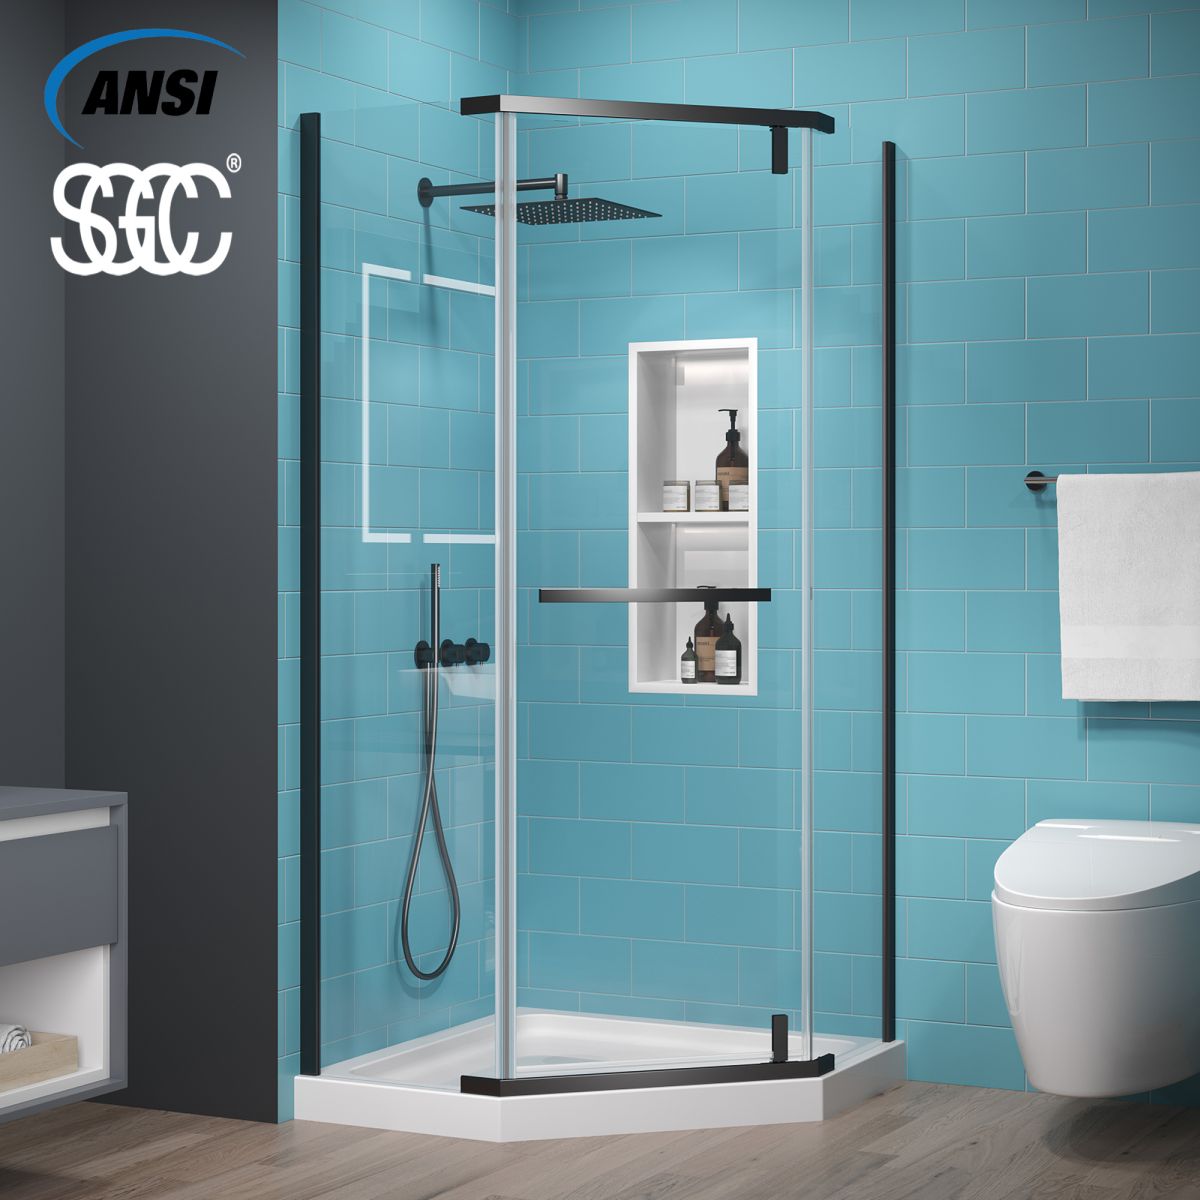 Prism Neo-Angle Frameless Shower Door 36 in. W x 72 in. H,Corner Shower Enclosure with 6mm Clear Glass,Pivot Shower Doors,Matte Black